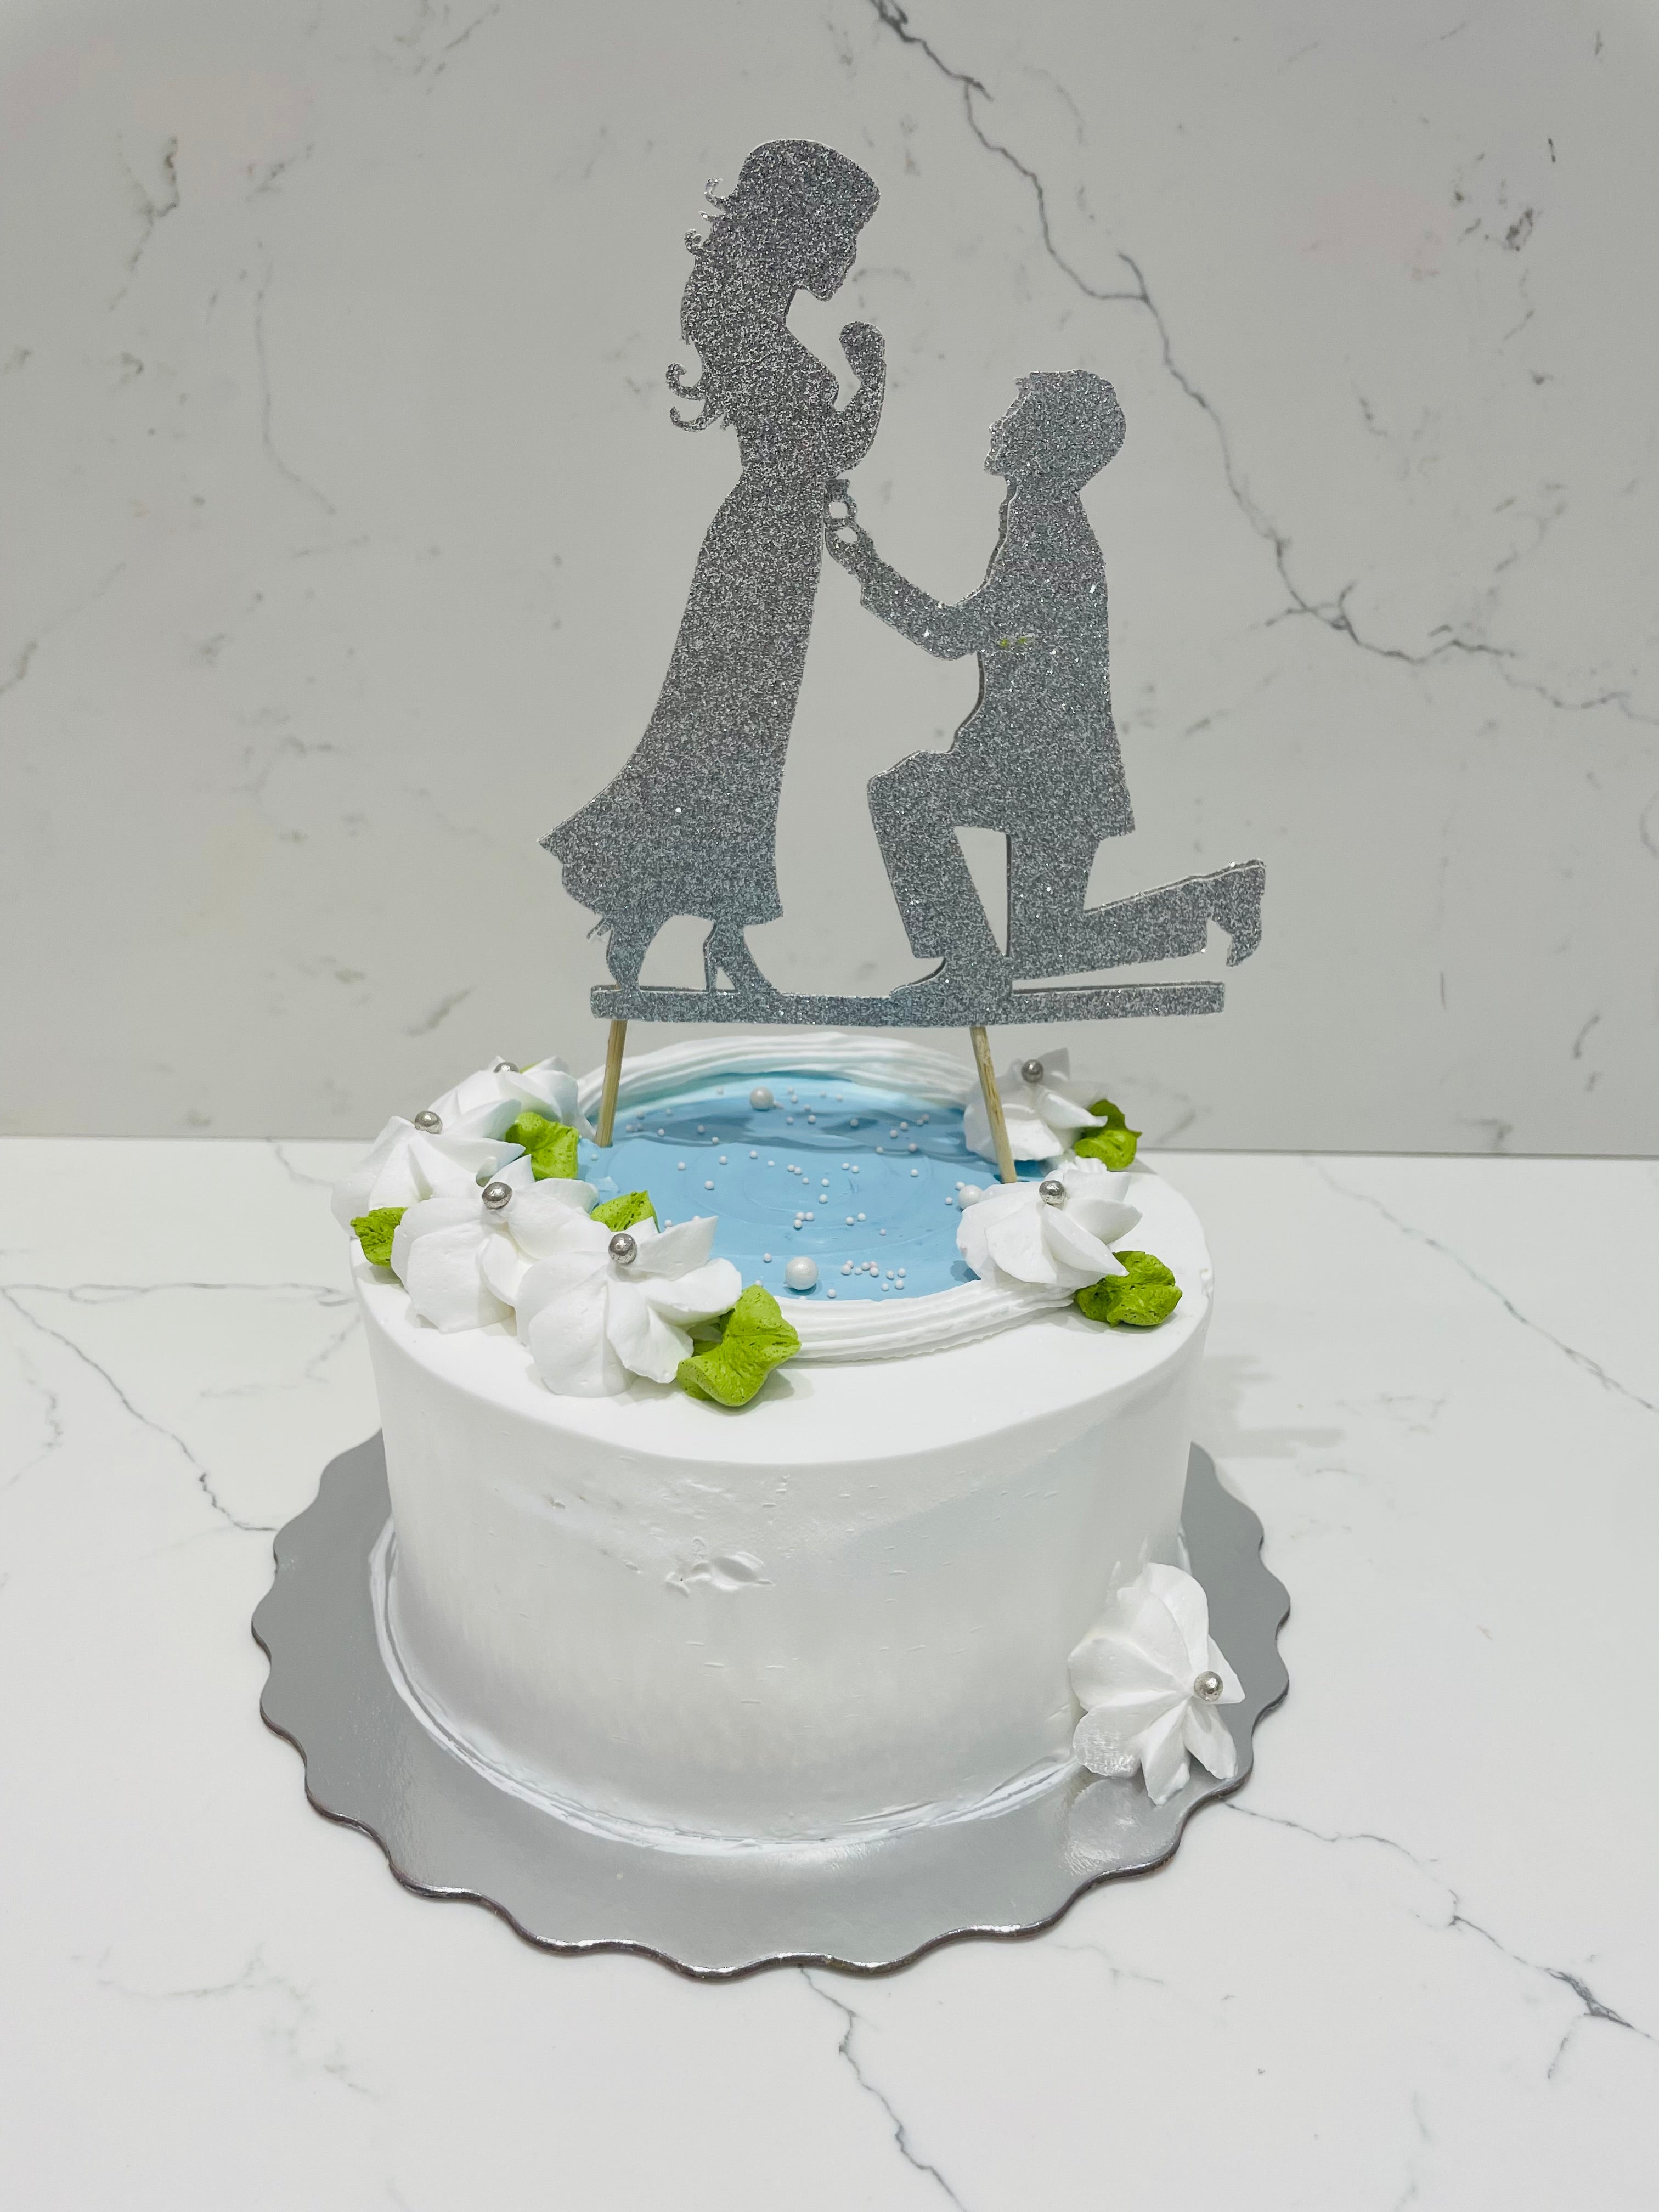 Proposal on the beach cake